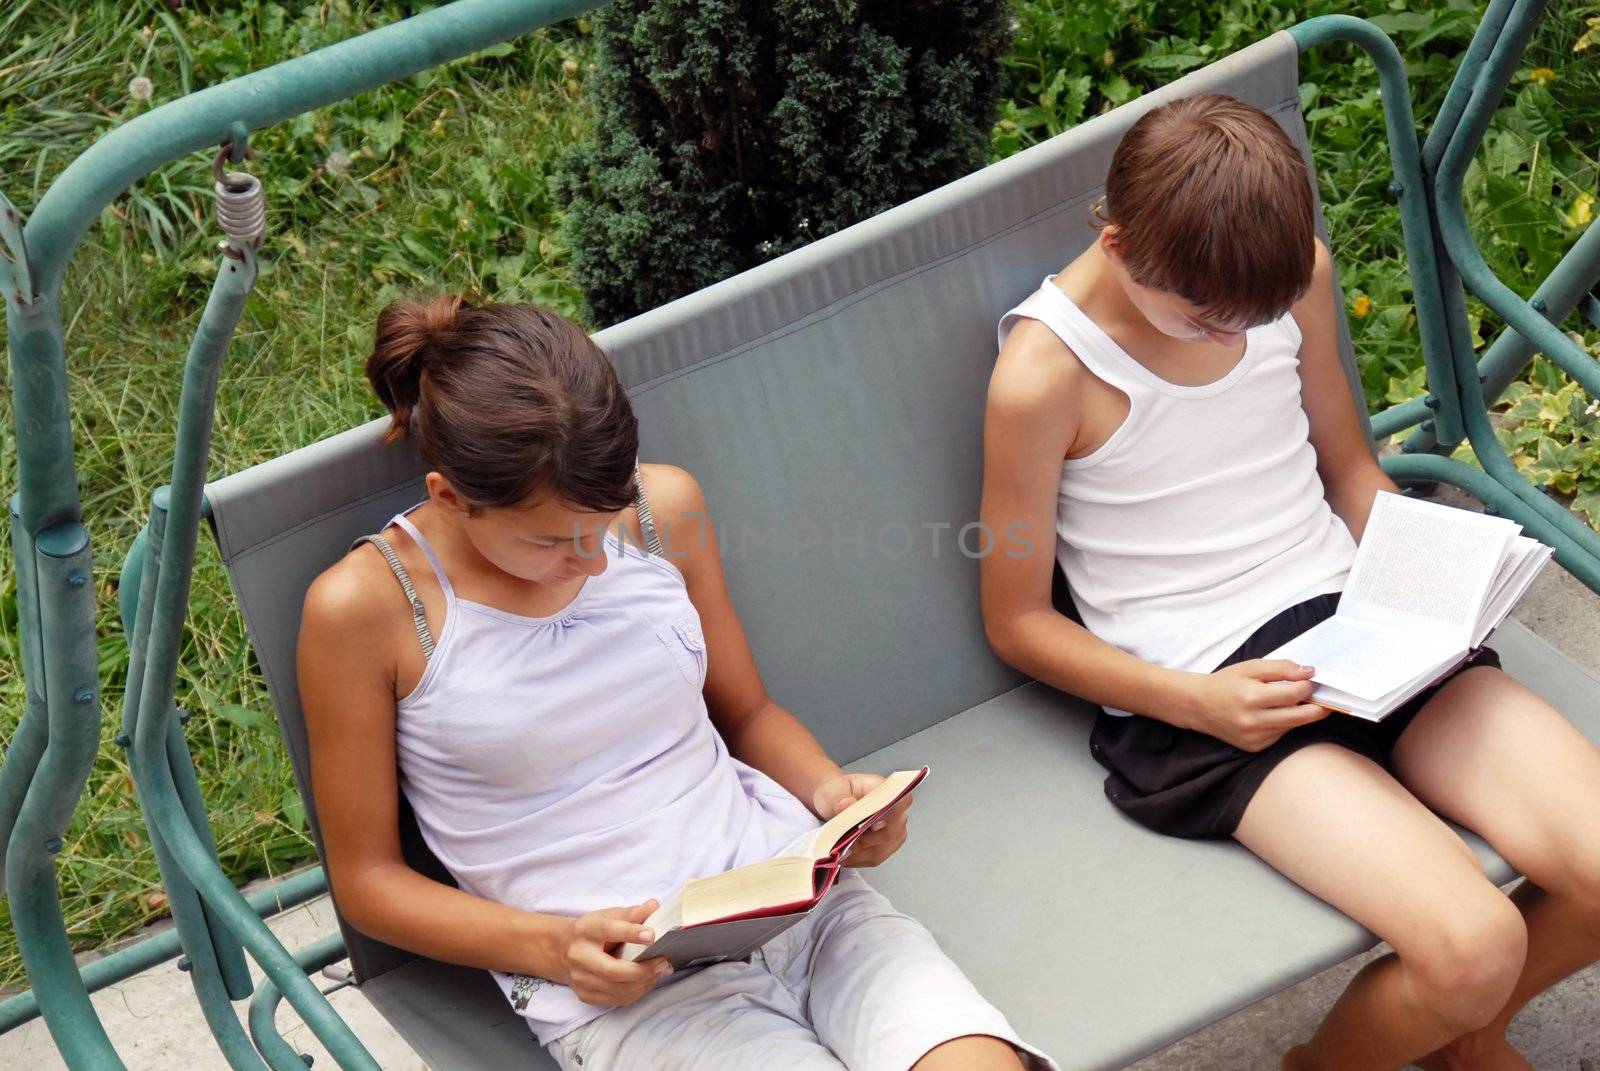 teen girl and boy reading books in yard outdoor